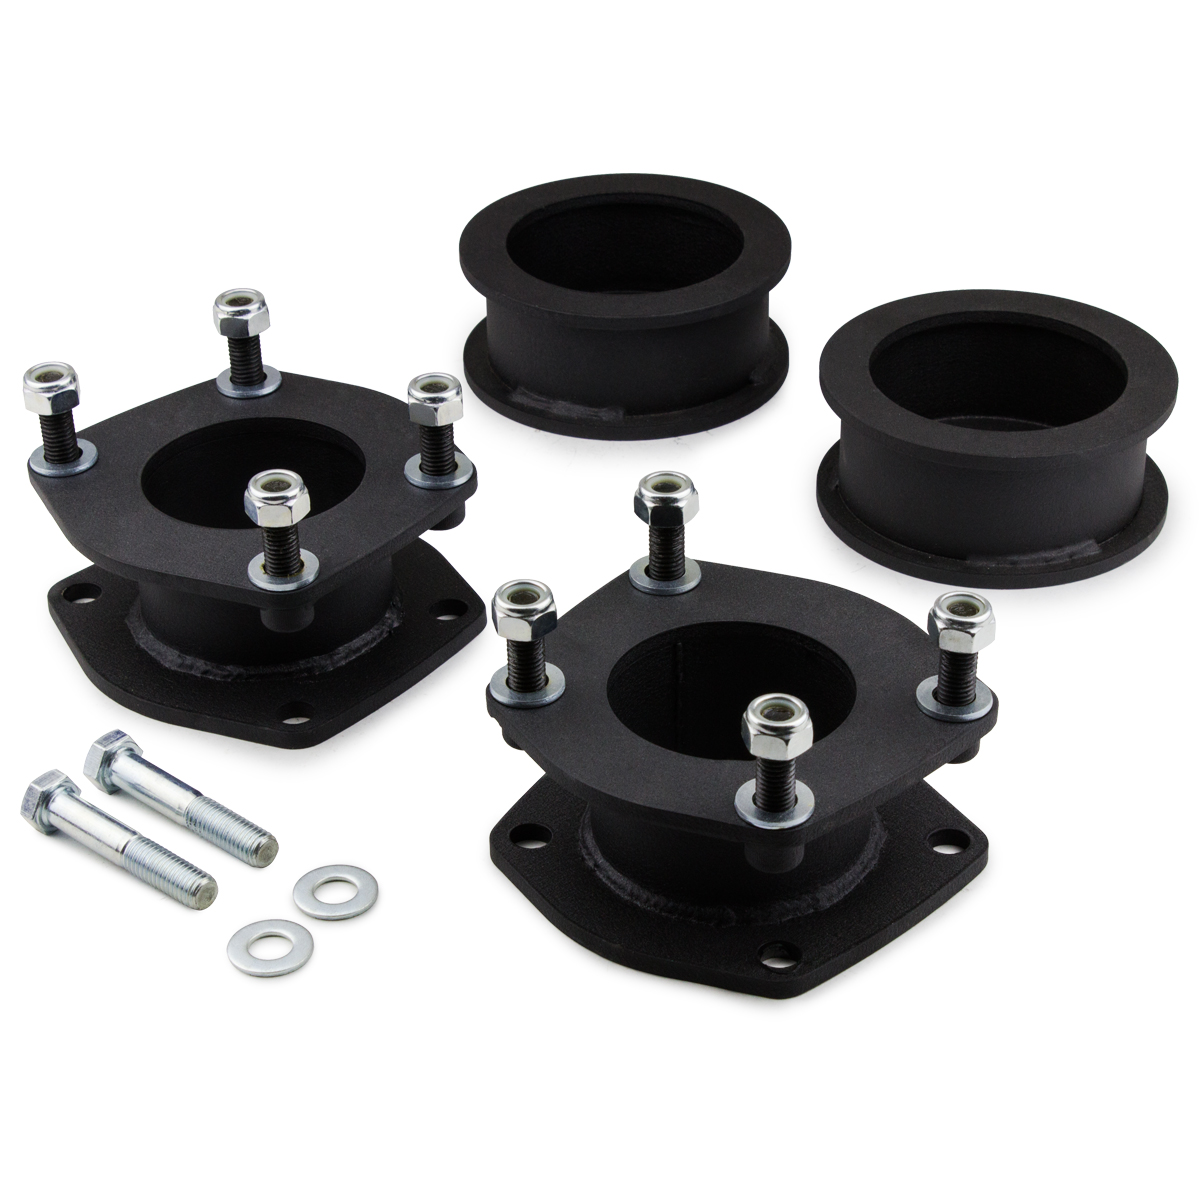 3 inch Front + 3 inch Rear Lift Kit For 2005-2010 Jeep Commander Grand Cherokee 2WD 4WD